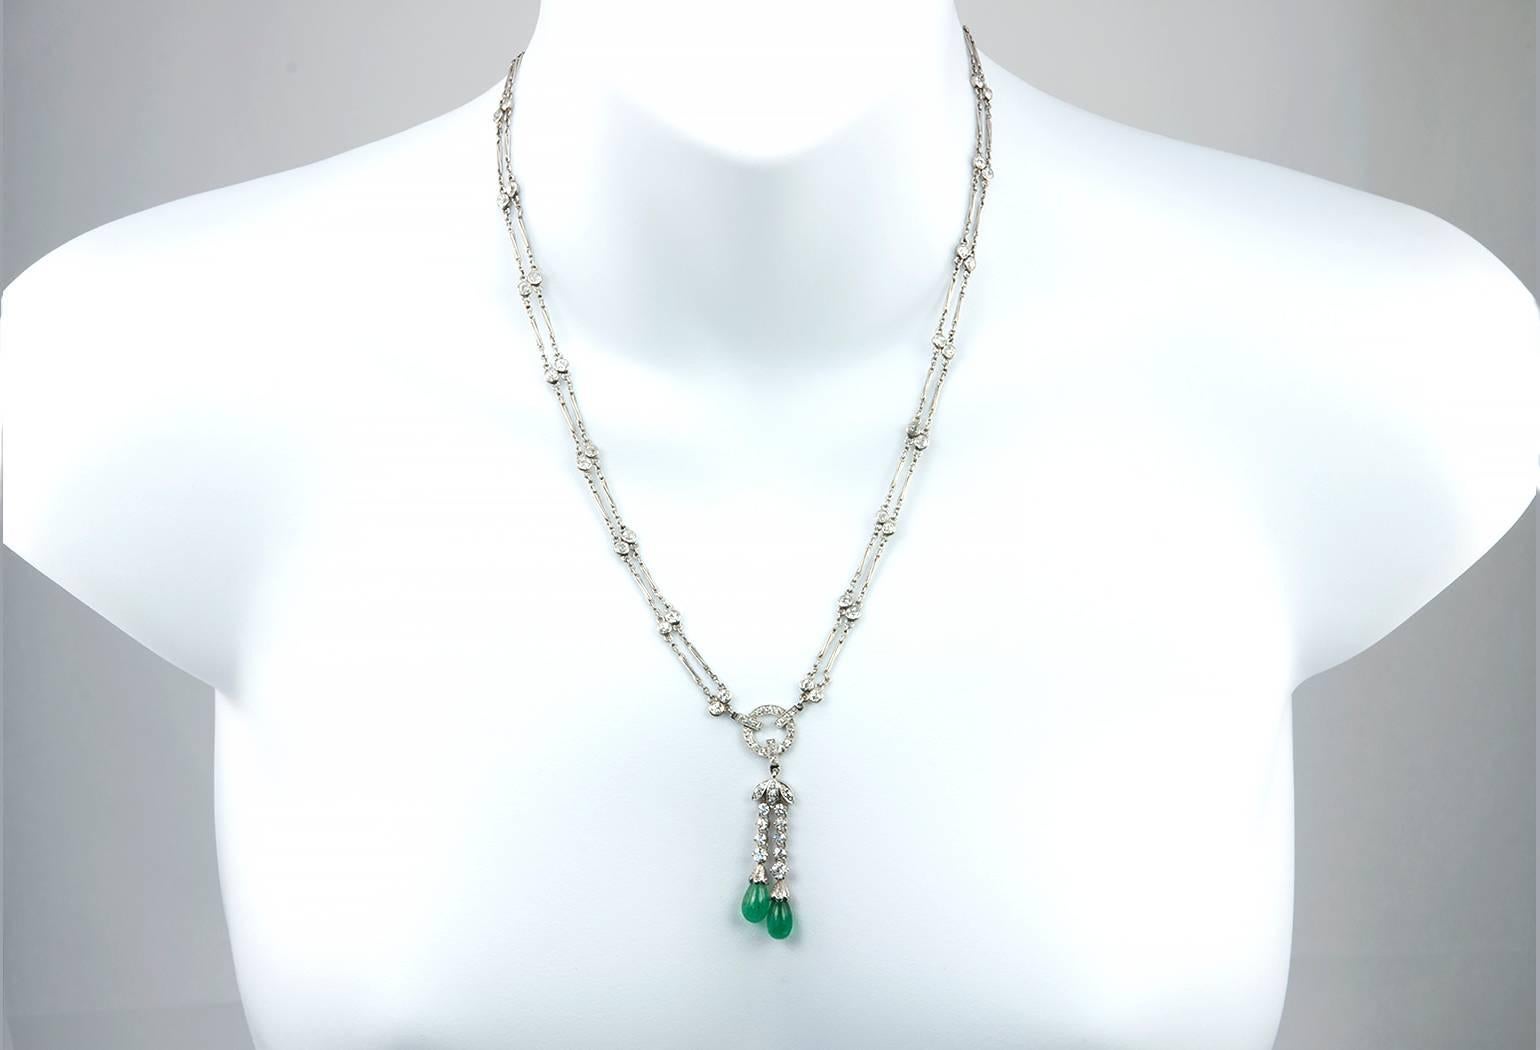 A stunning antique necklace from circa 1920s!  This long necklace features a double platinum link chain that alternates with bezel set diamonds leading down to the center drop of diamonds and 2 polished emeralds.  The 80 Old European Cut diamonds in